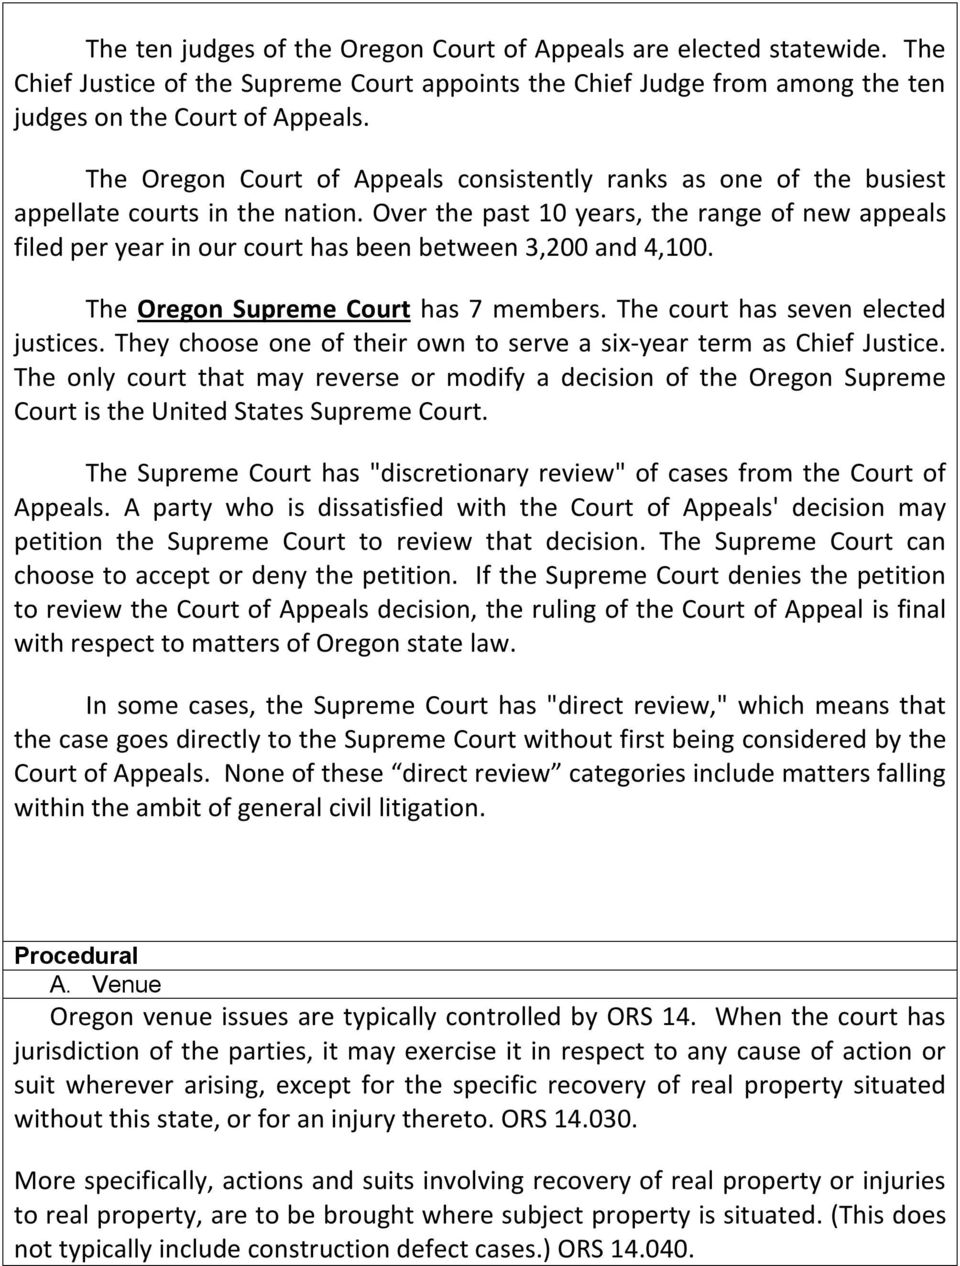 Over the past 10 years, the range of new appeals filed per year in our court has been between 3,200 and 4,100. The Oregon Supreme Court has 7 members. The court has seven elected justices.